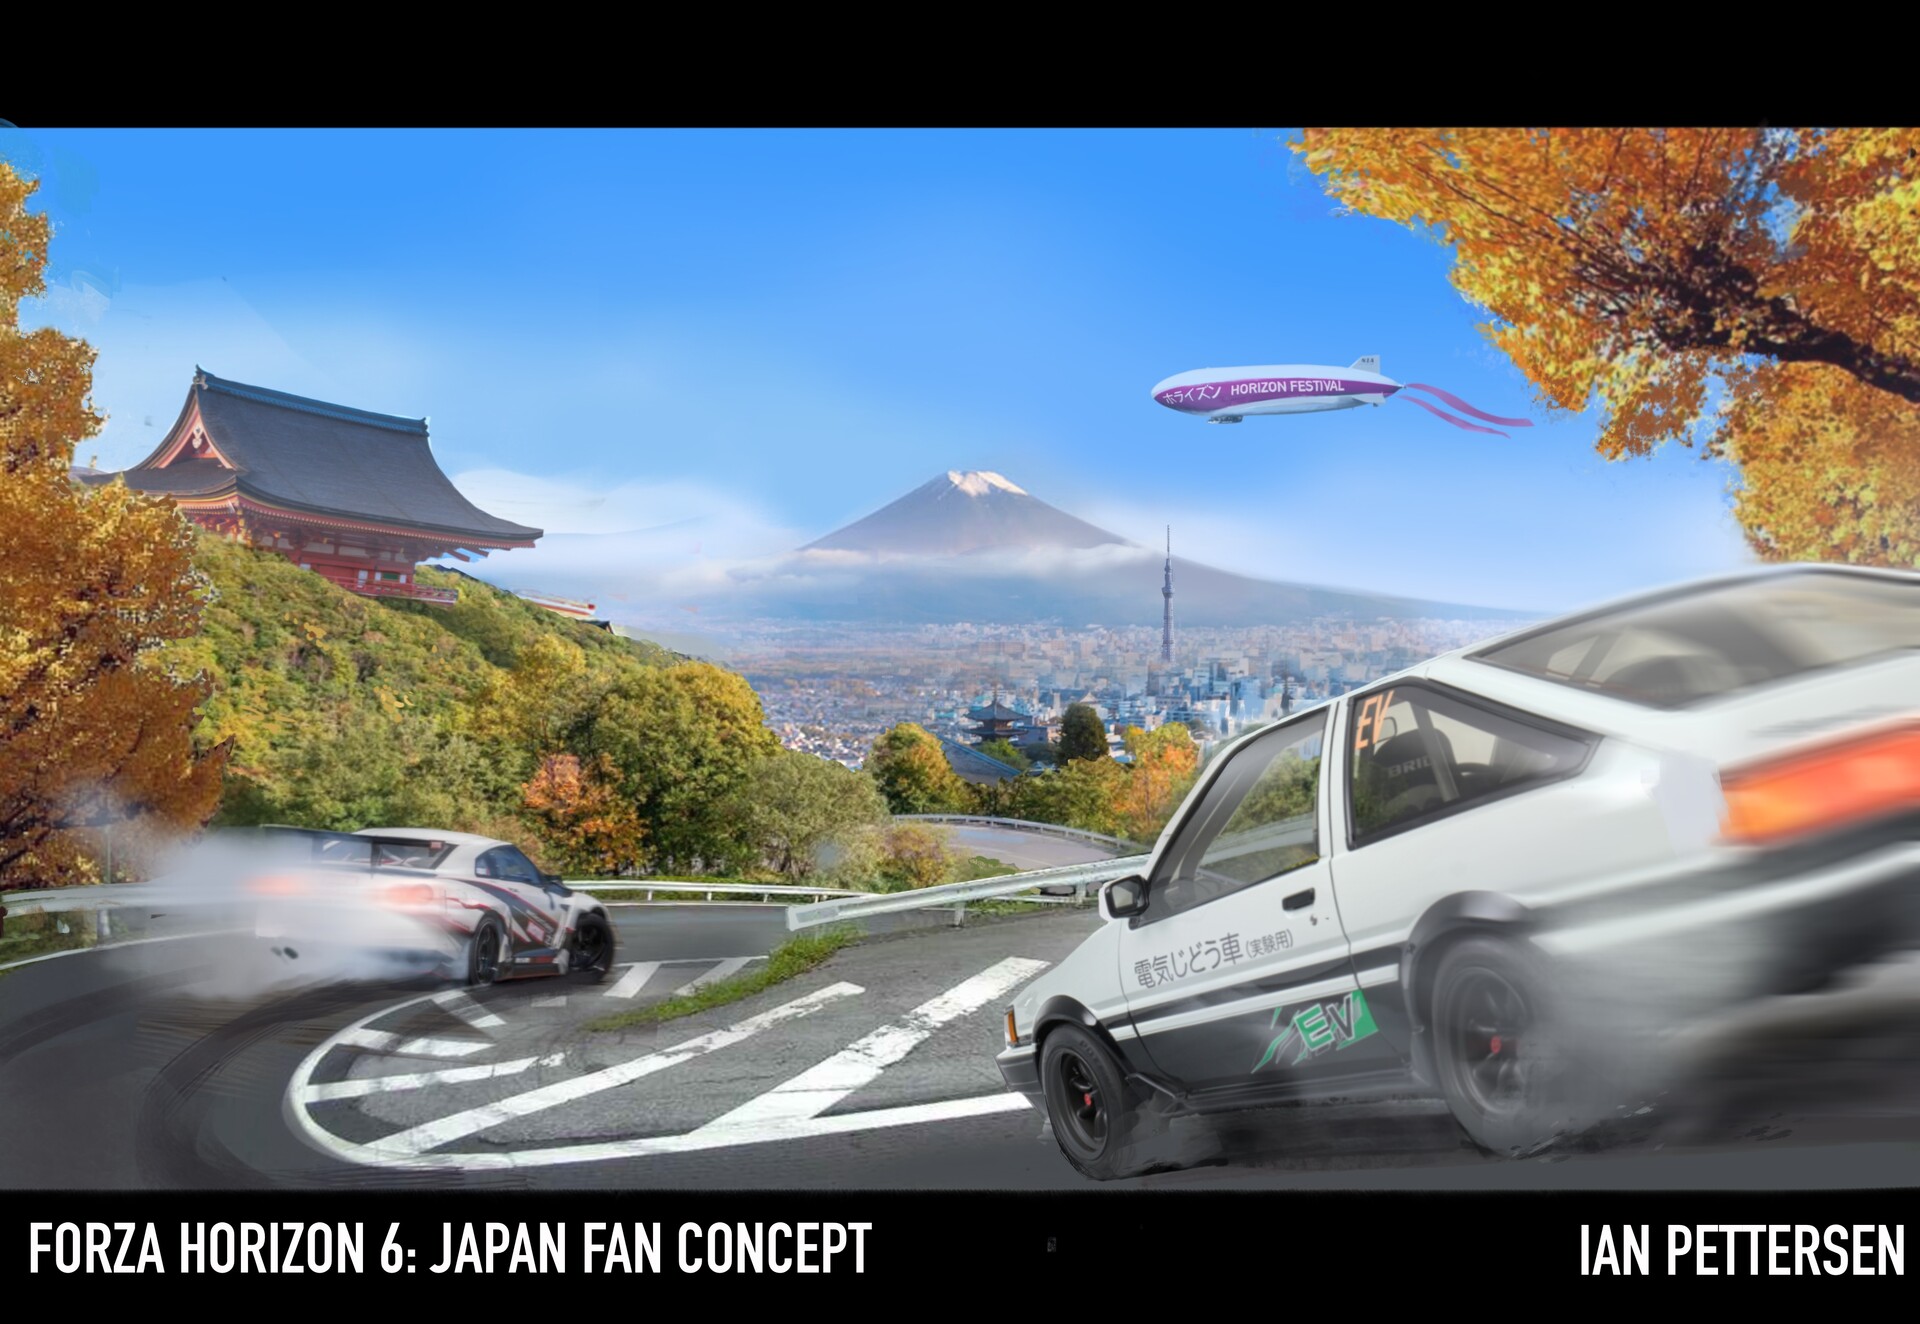 Playing The Closest Game To Forza Horizon 6 Japan! 